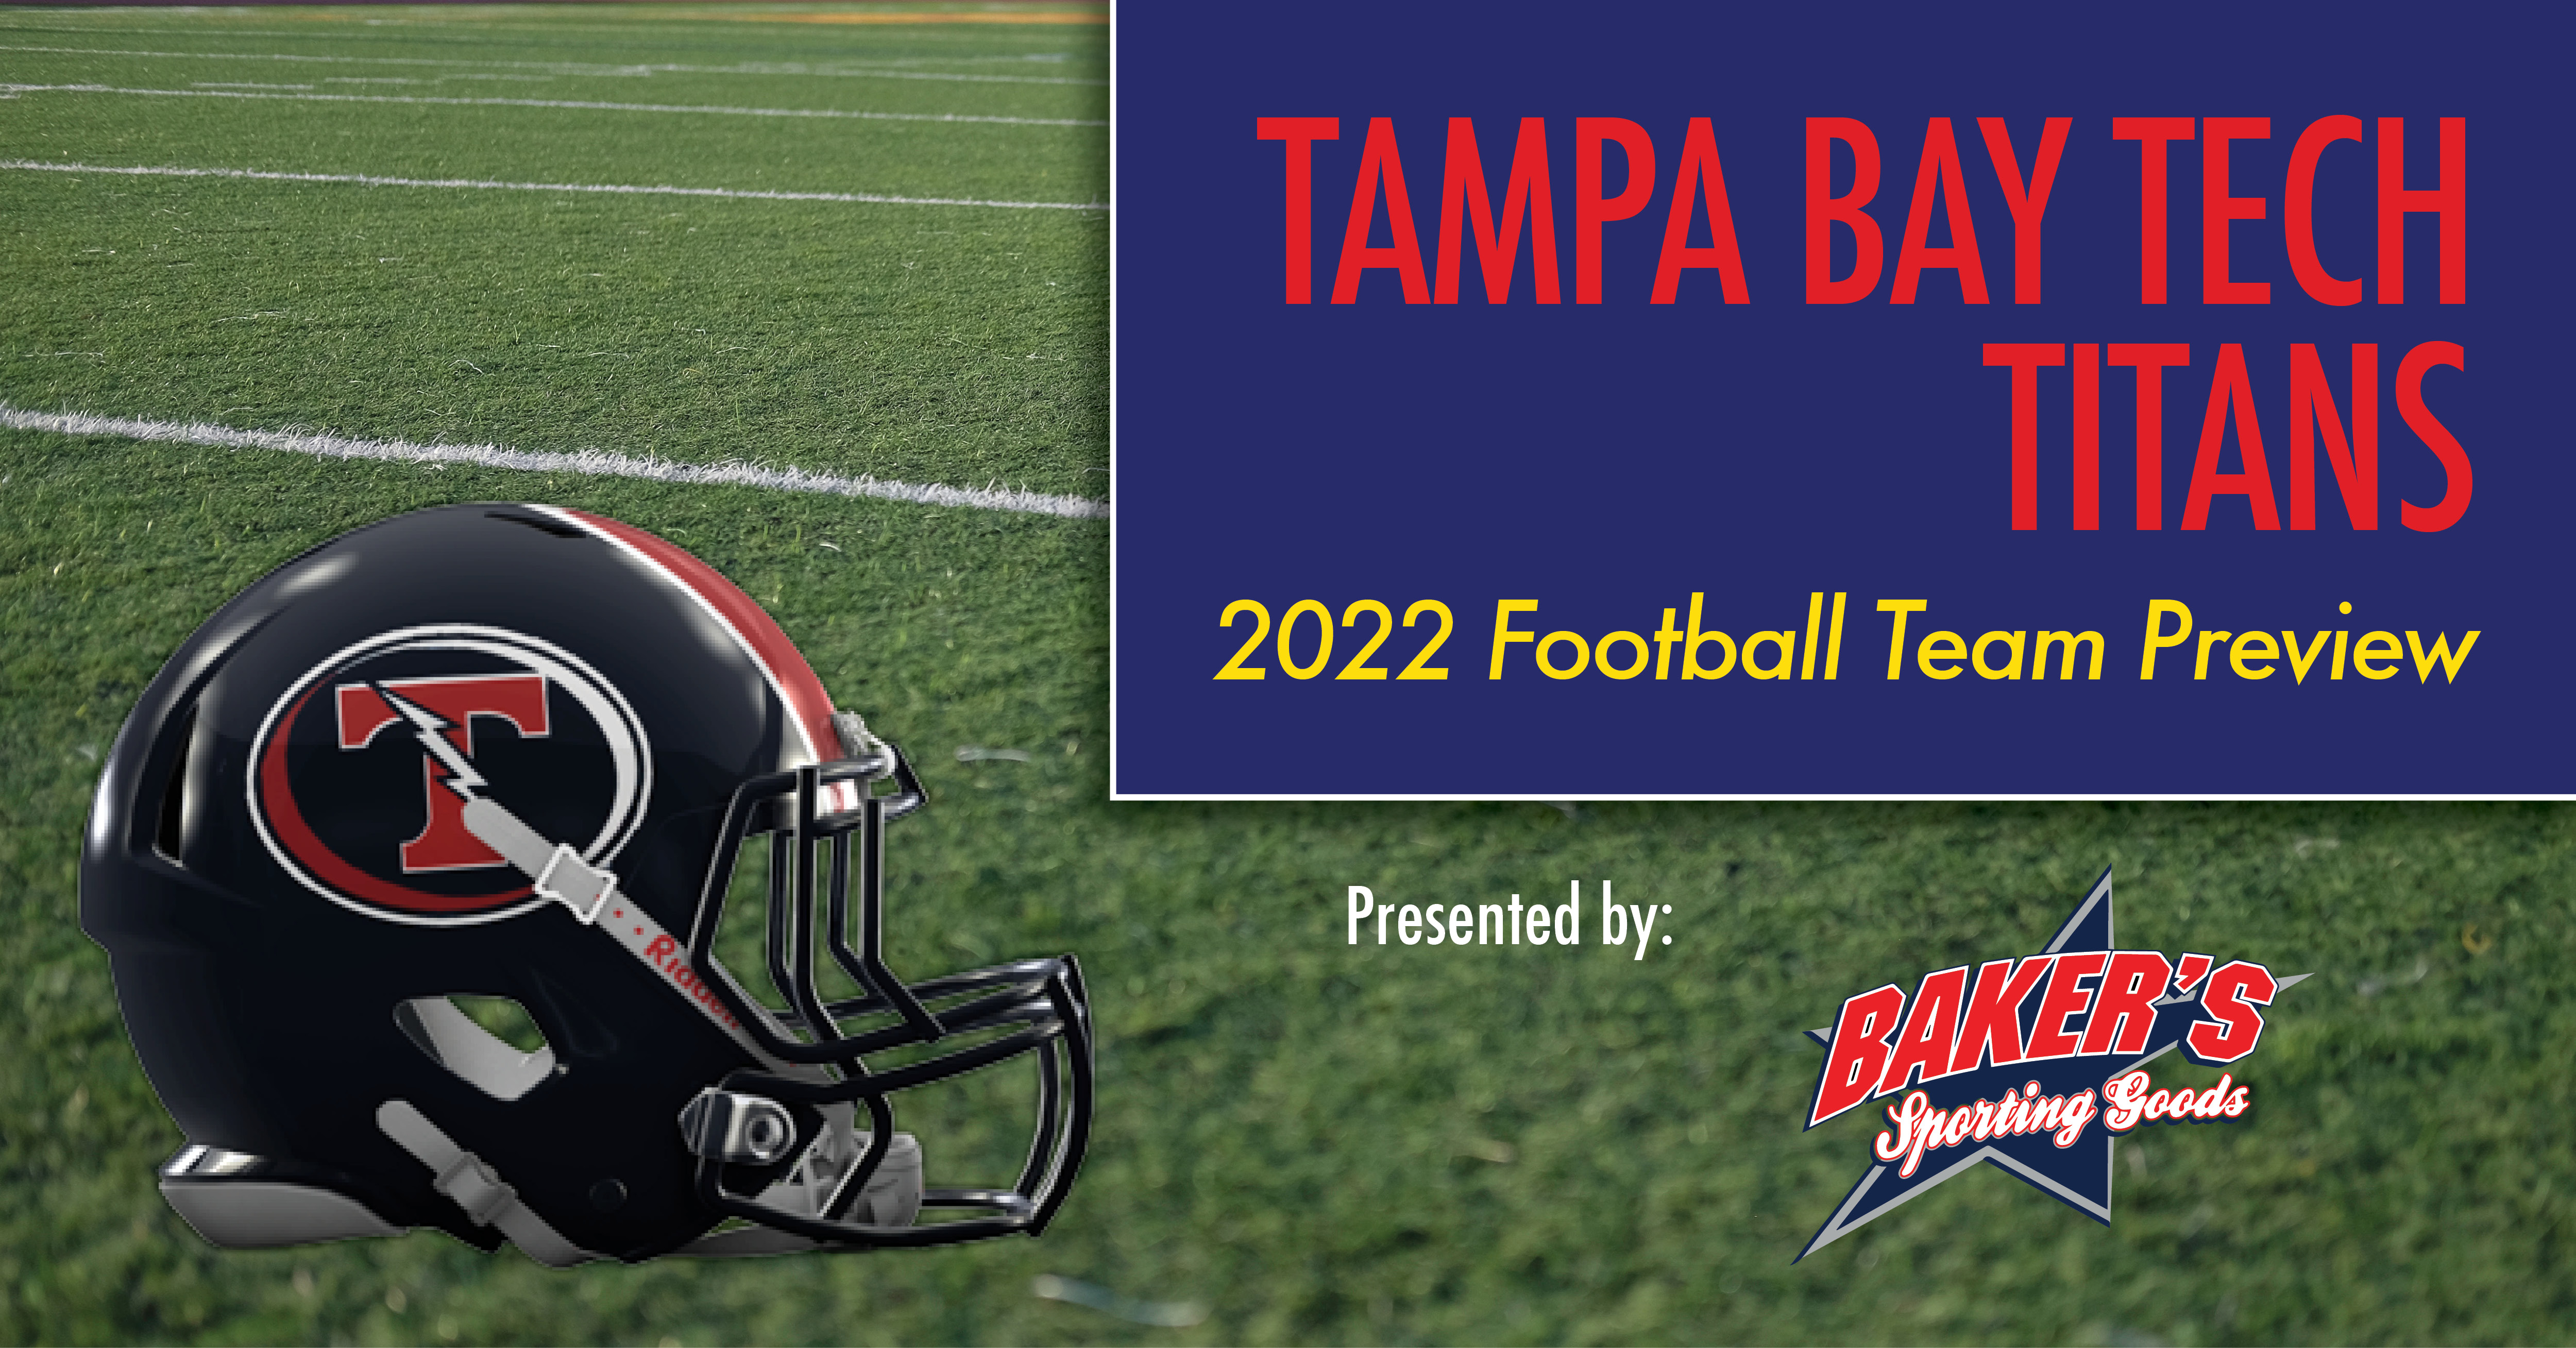 Tampa Bay Tech Football 2022 Team Preview - ITG Next